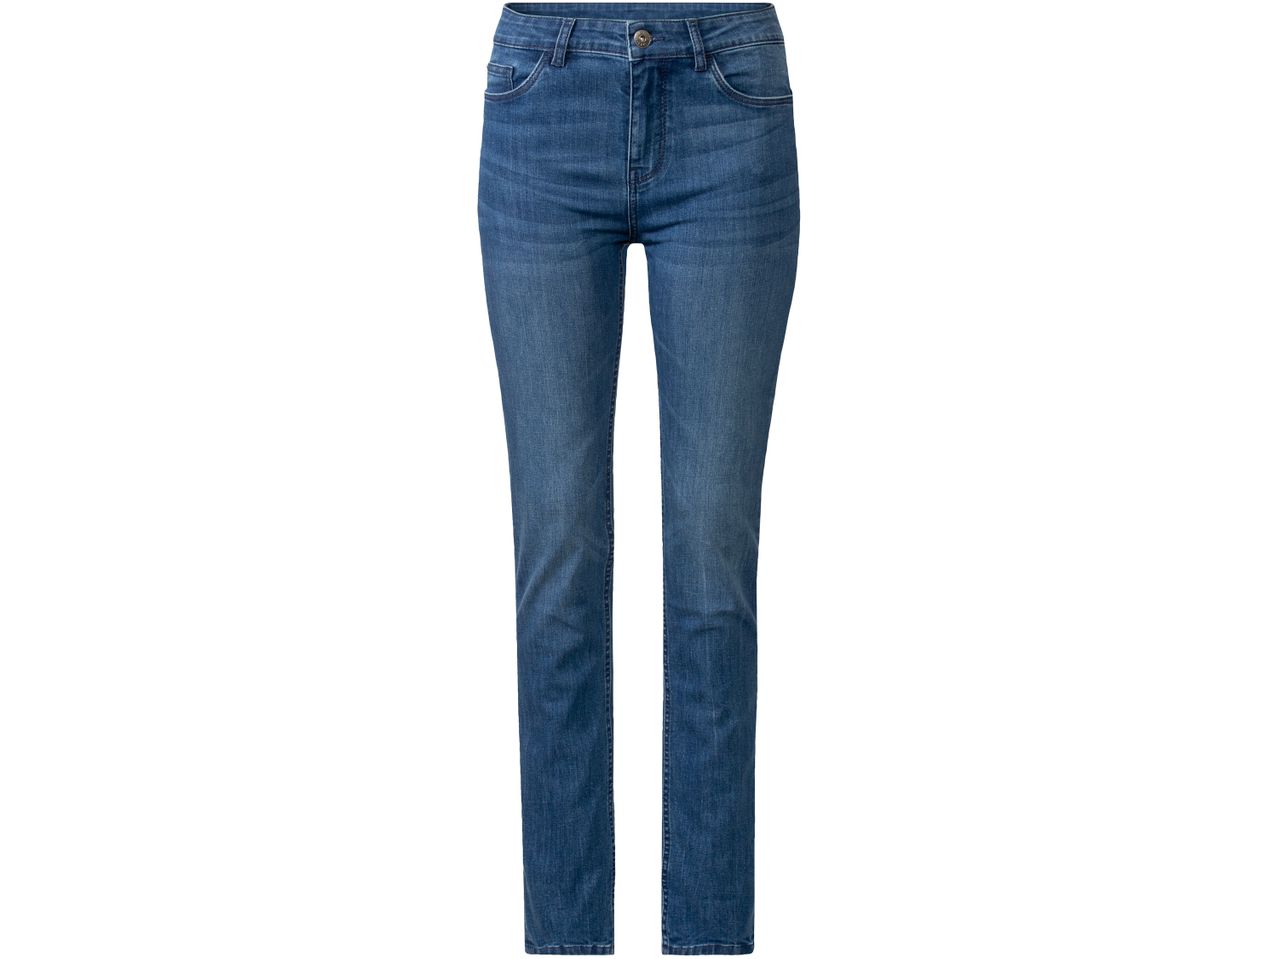 Go to full screen view: Ladies’ Jeans “Slim Fit” - Image 2